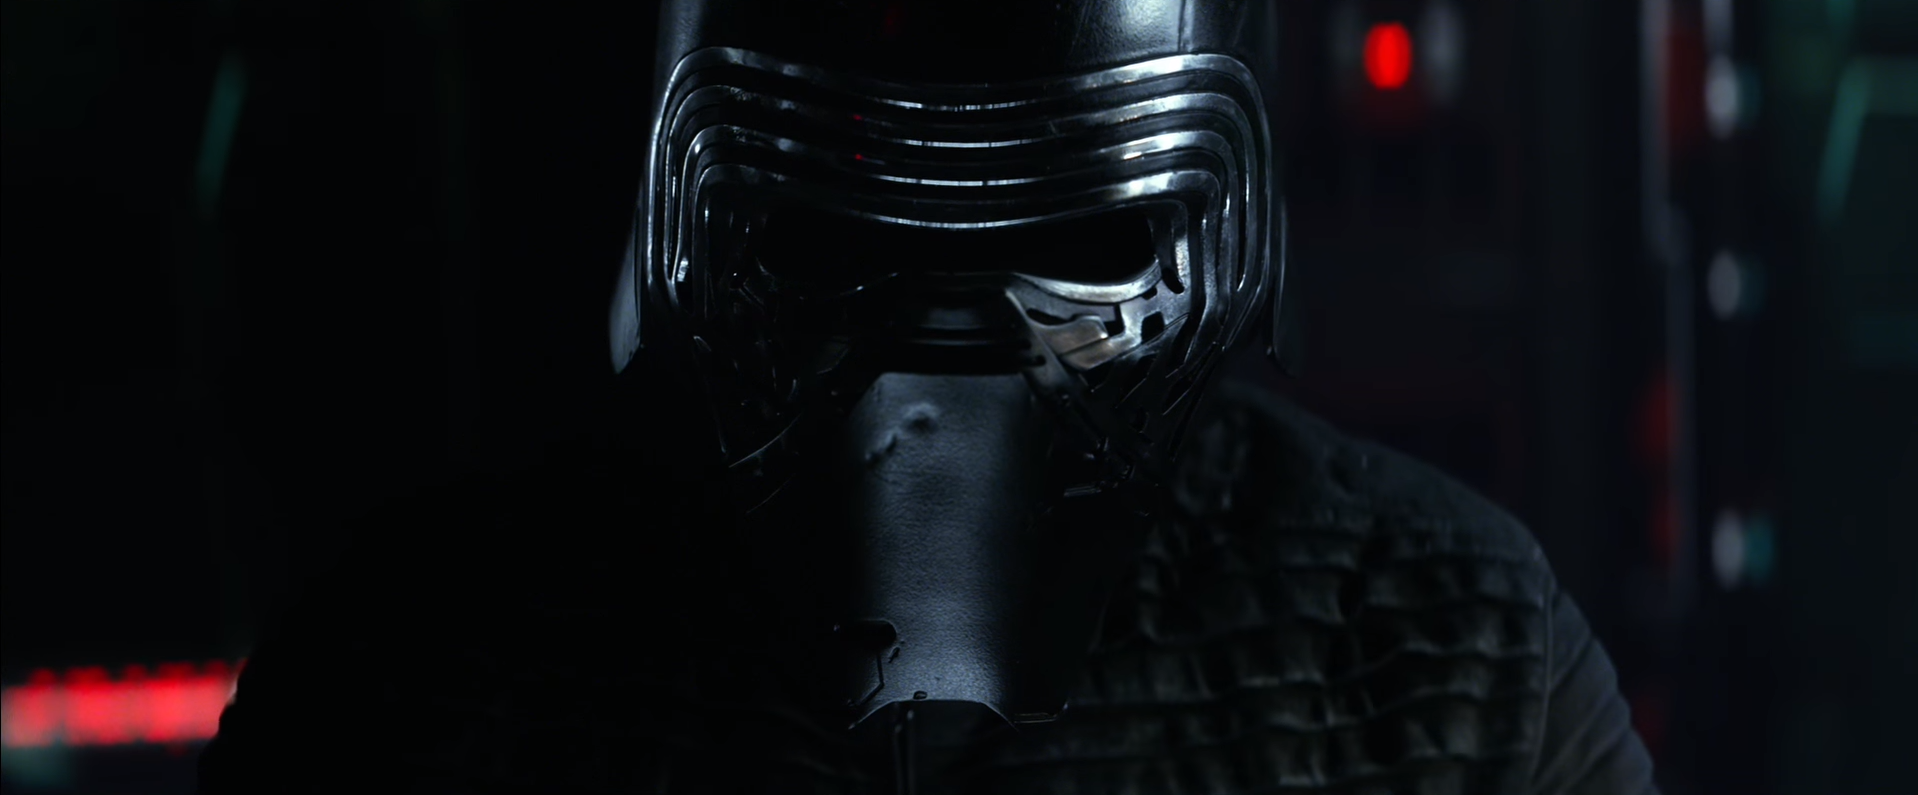 Let's Analyze The Third And Final Star Wars: The Force Awakens Trailer!